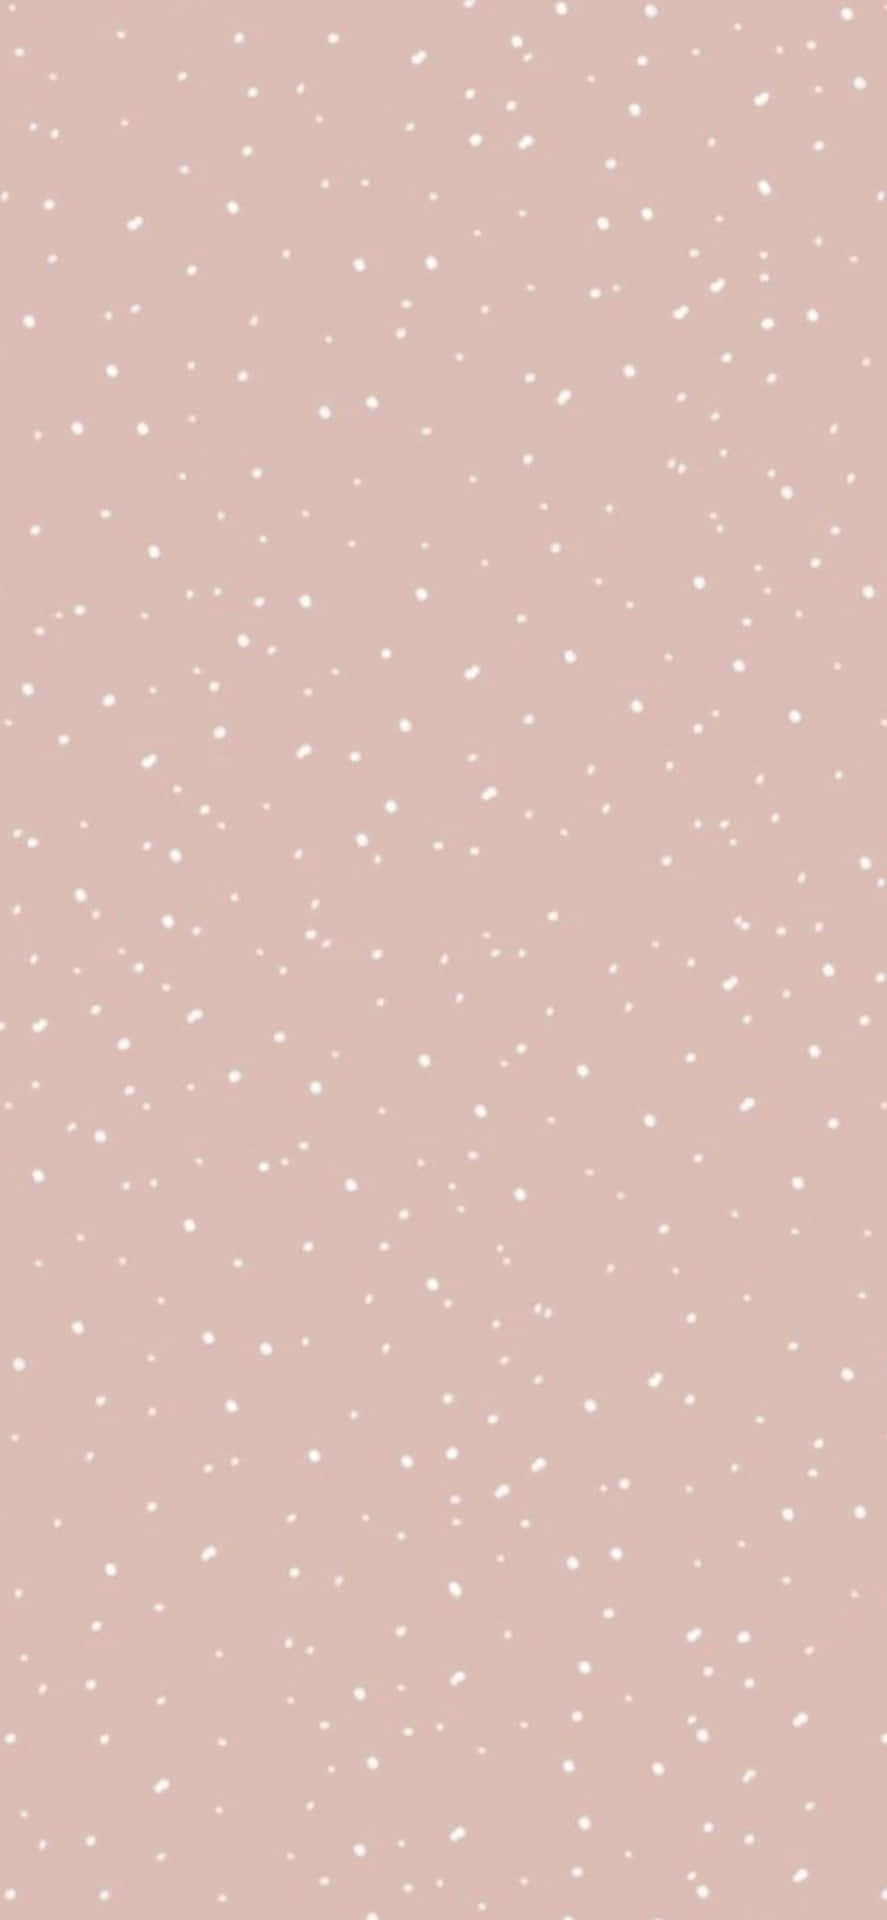 Iphone X Minimal Dotted Background